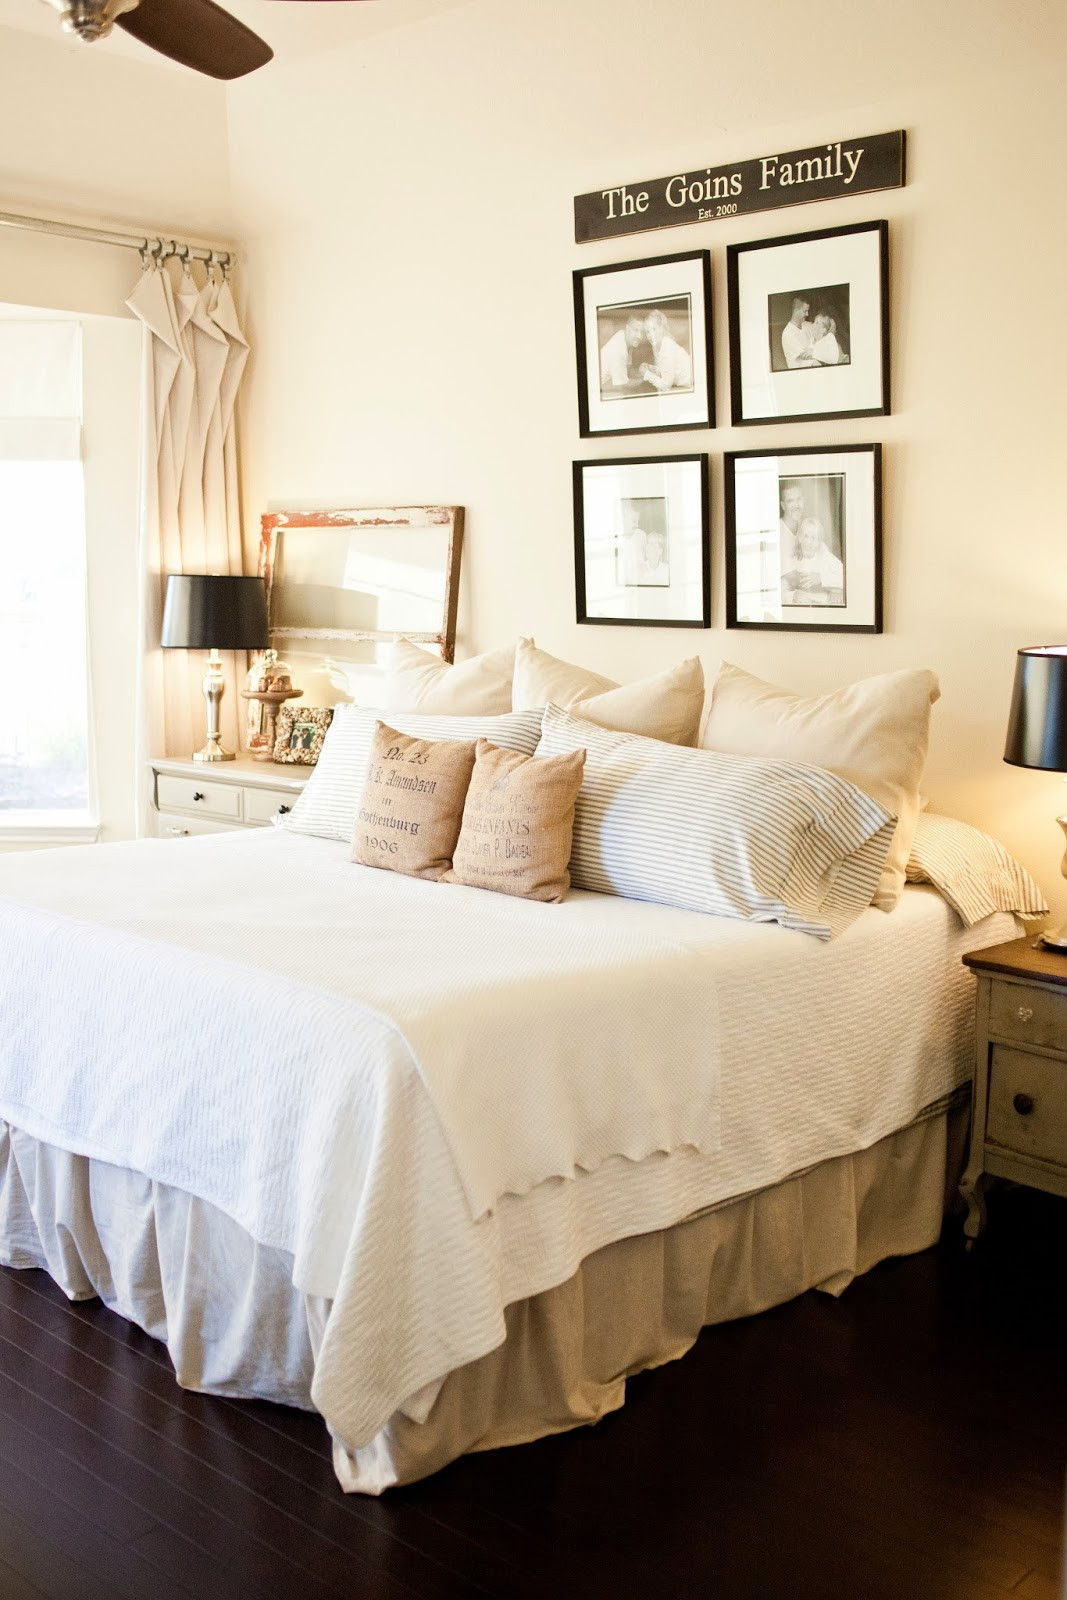 Master Bedroom Bedding Ideas
 the little cottage on the pond Our master bedroom